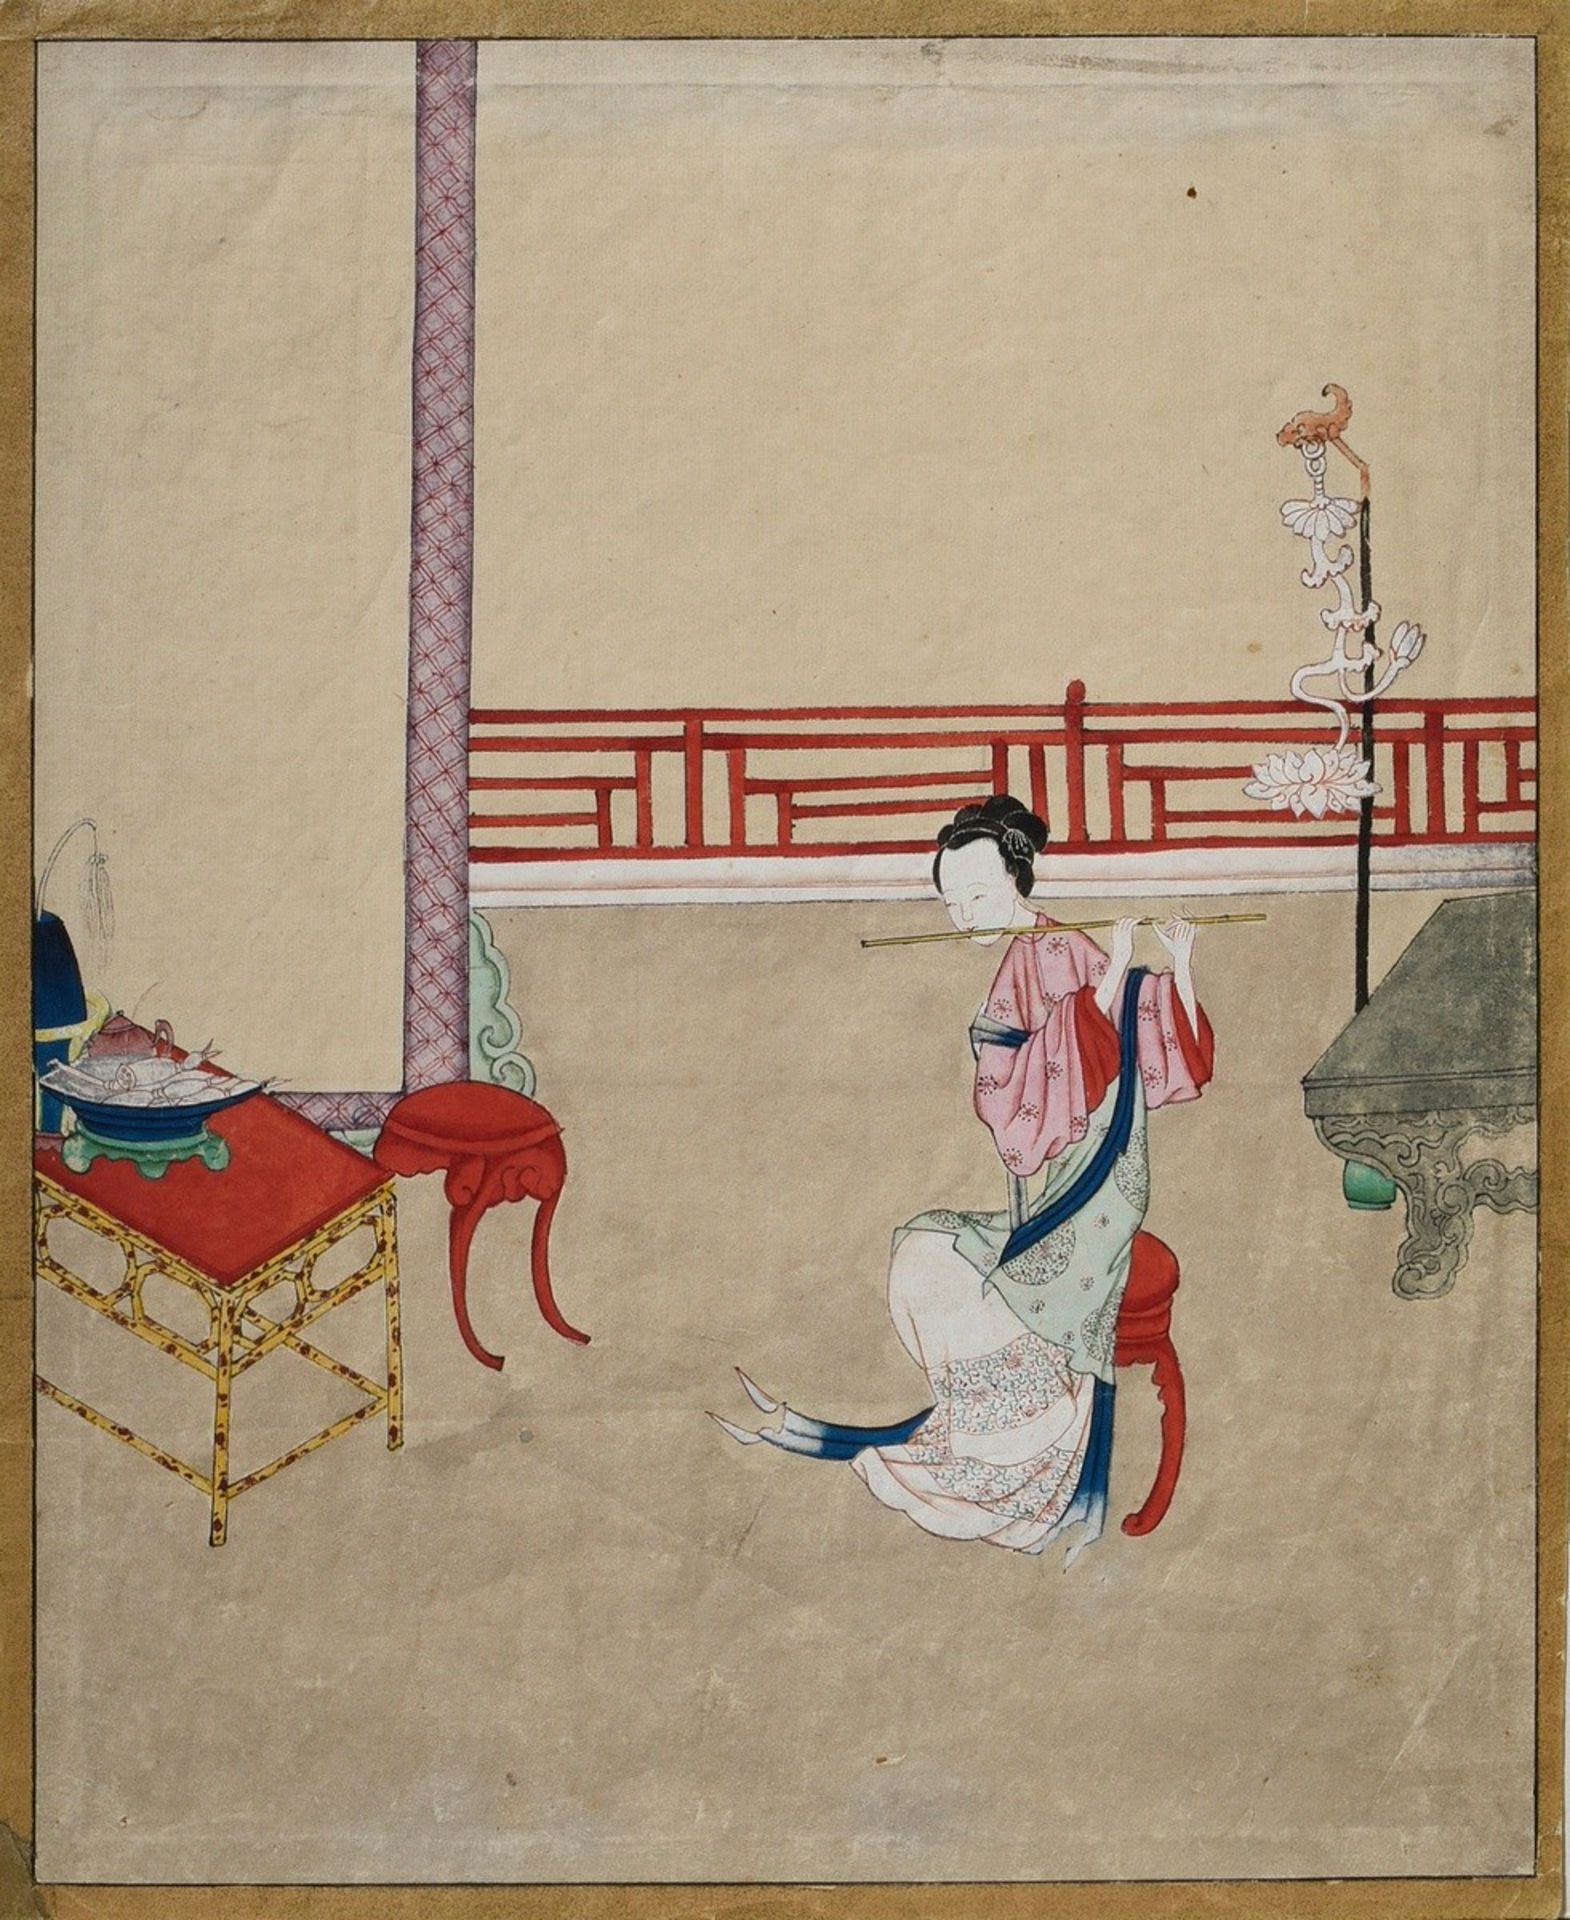 Ink and colour painting on paper "Flute playing court lady in interior", China Qing Dynasty, 29x35c